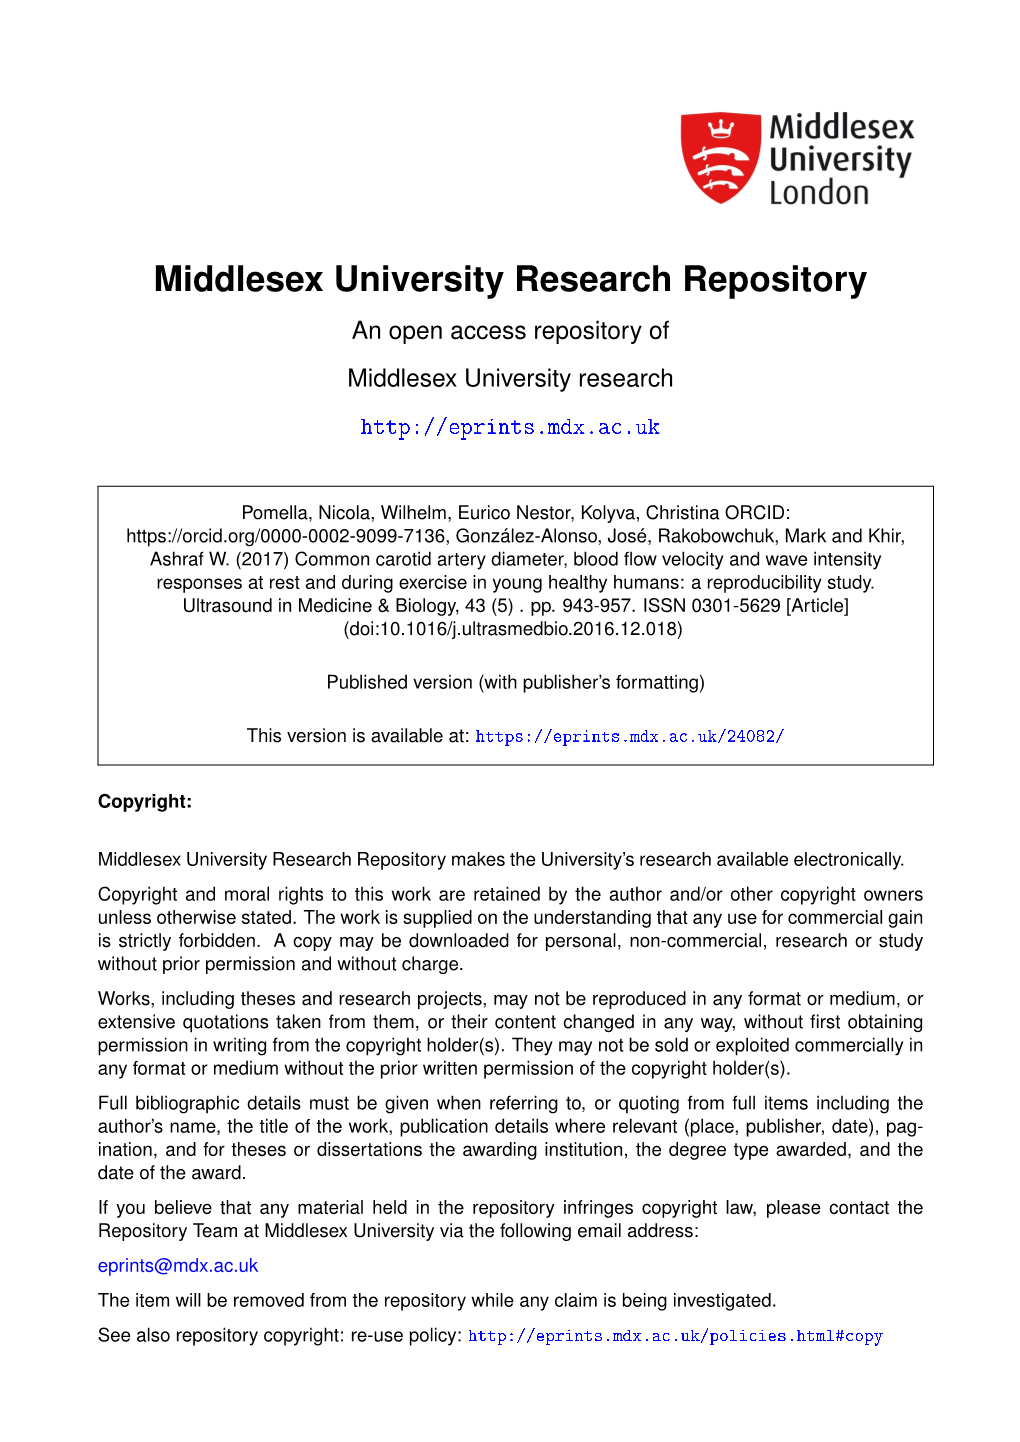 Middlesex University Research Repository an Open Access Repository of Middlesex University Research